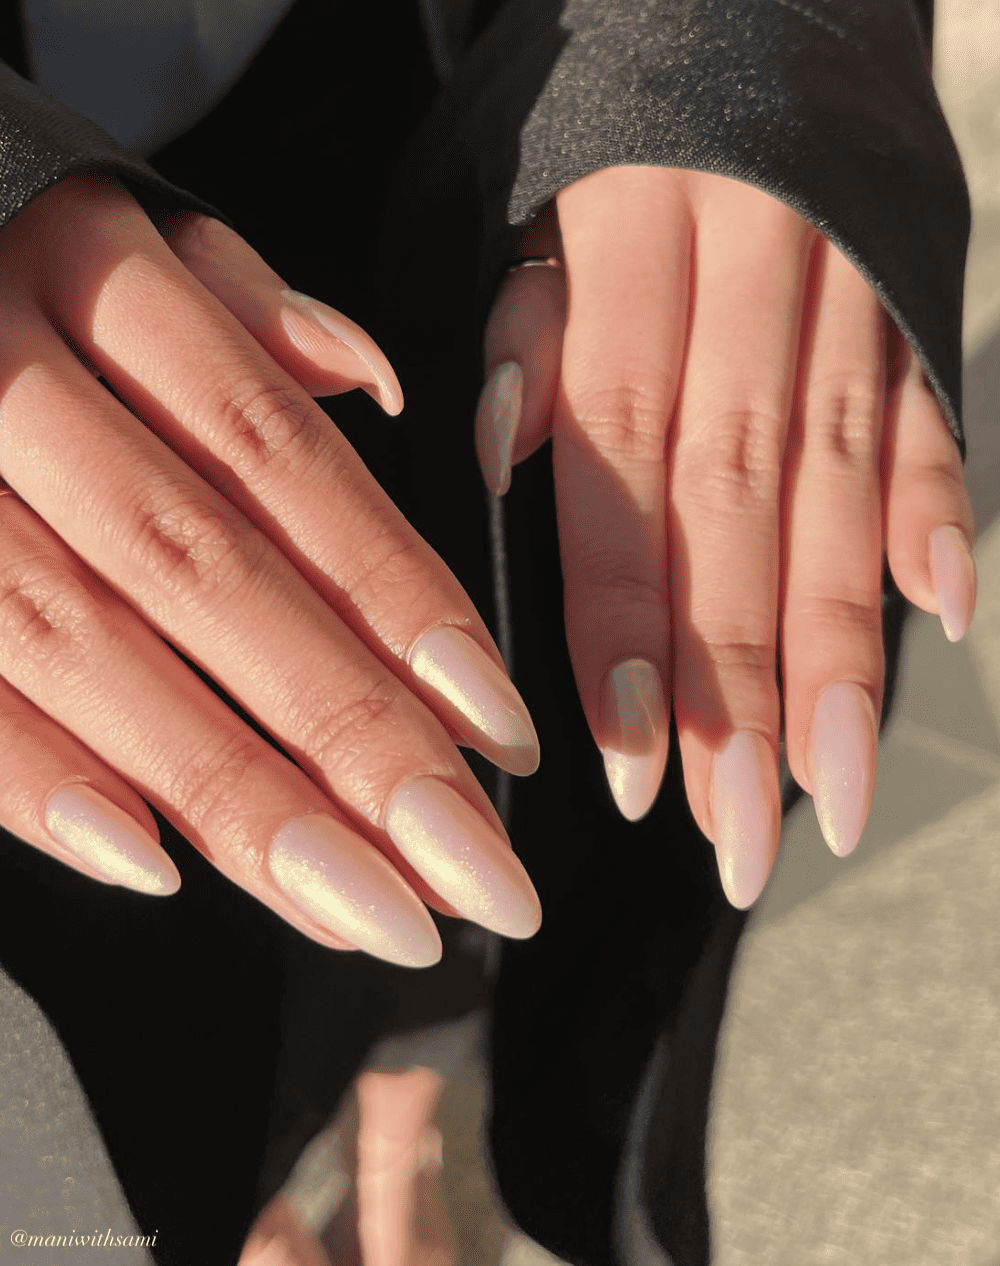 A woman's graduation nails featuring a nude pink polish on almond nails with a shimmering chrome finish